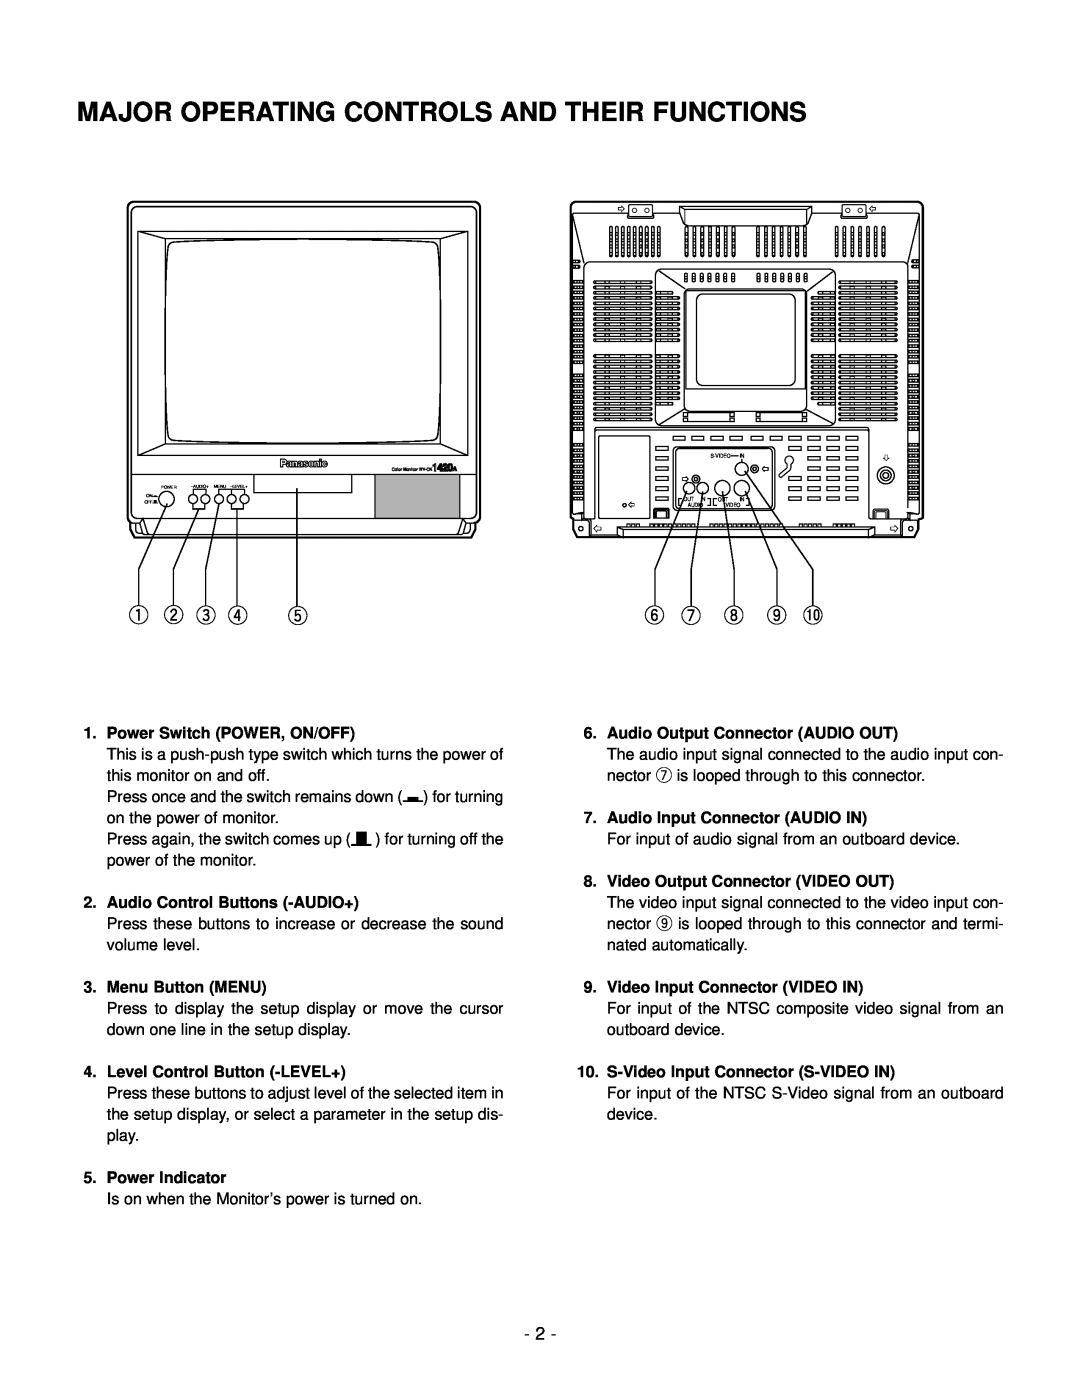 Panasonic WV-CK1420A manual Major Operating Controls And Their Functions 